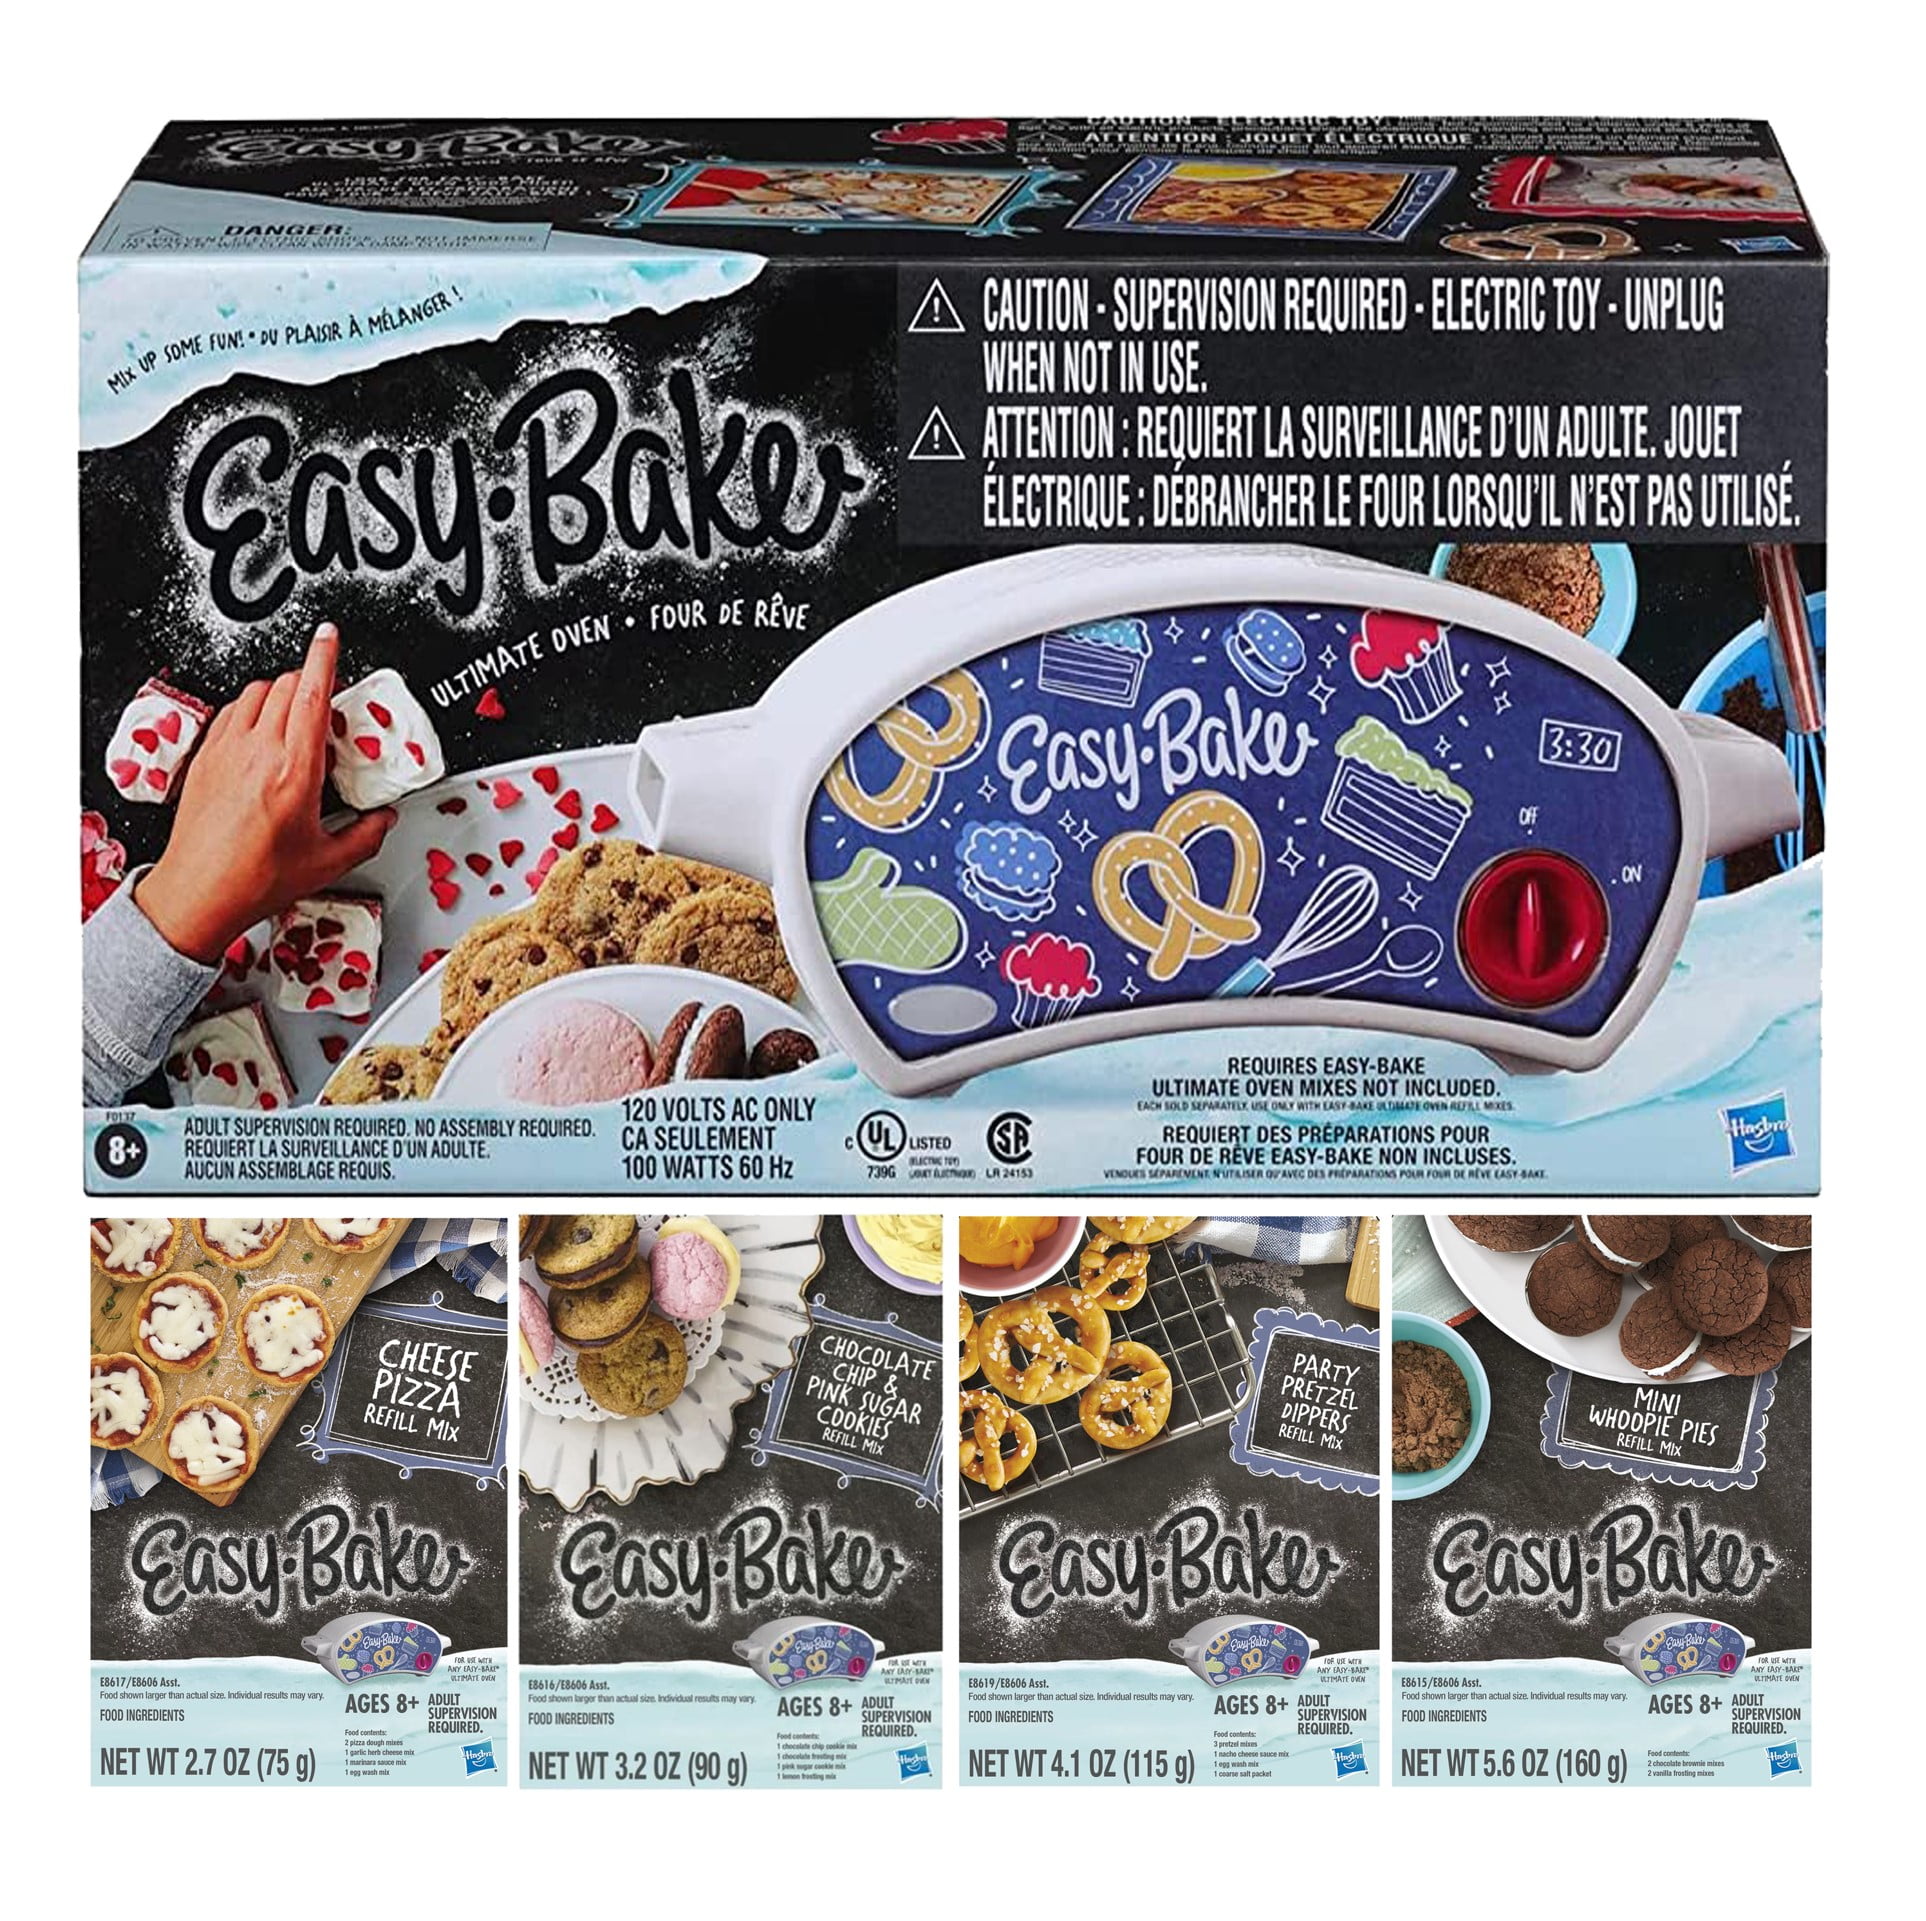 Easy Bake Ultimate Oven Baking Bundle with Easy Bake Ultimate Oven, Chocolate Chip & Pink Sugar Cookies, Pretzel, Mini Whoopie, Cheese Pizza Mixes and More for Kids 8yrs and Up